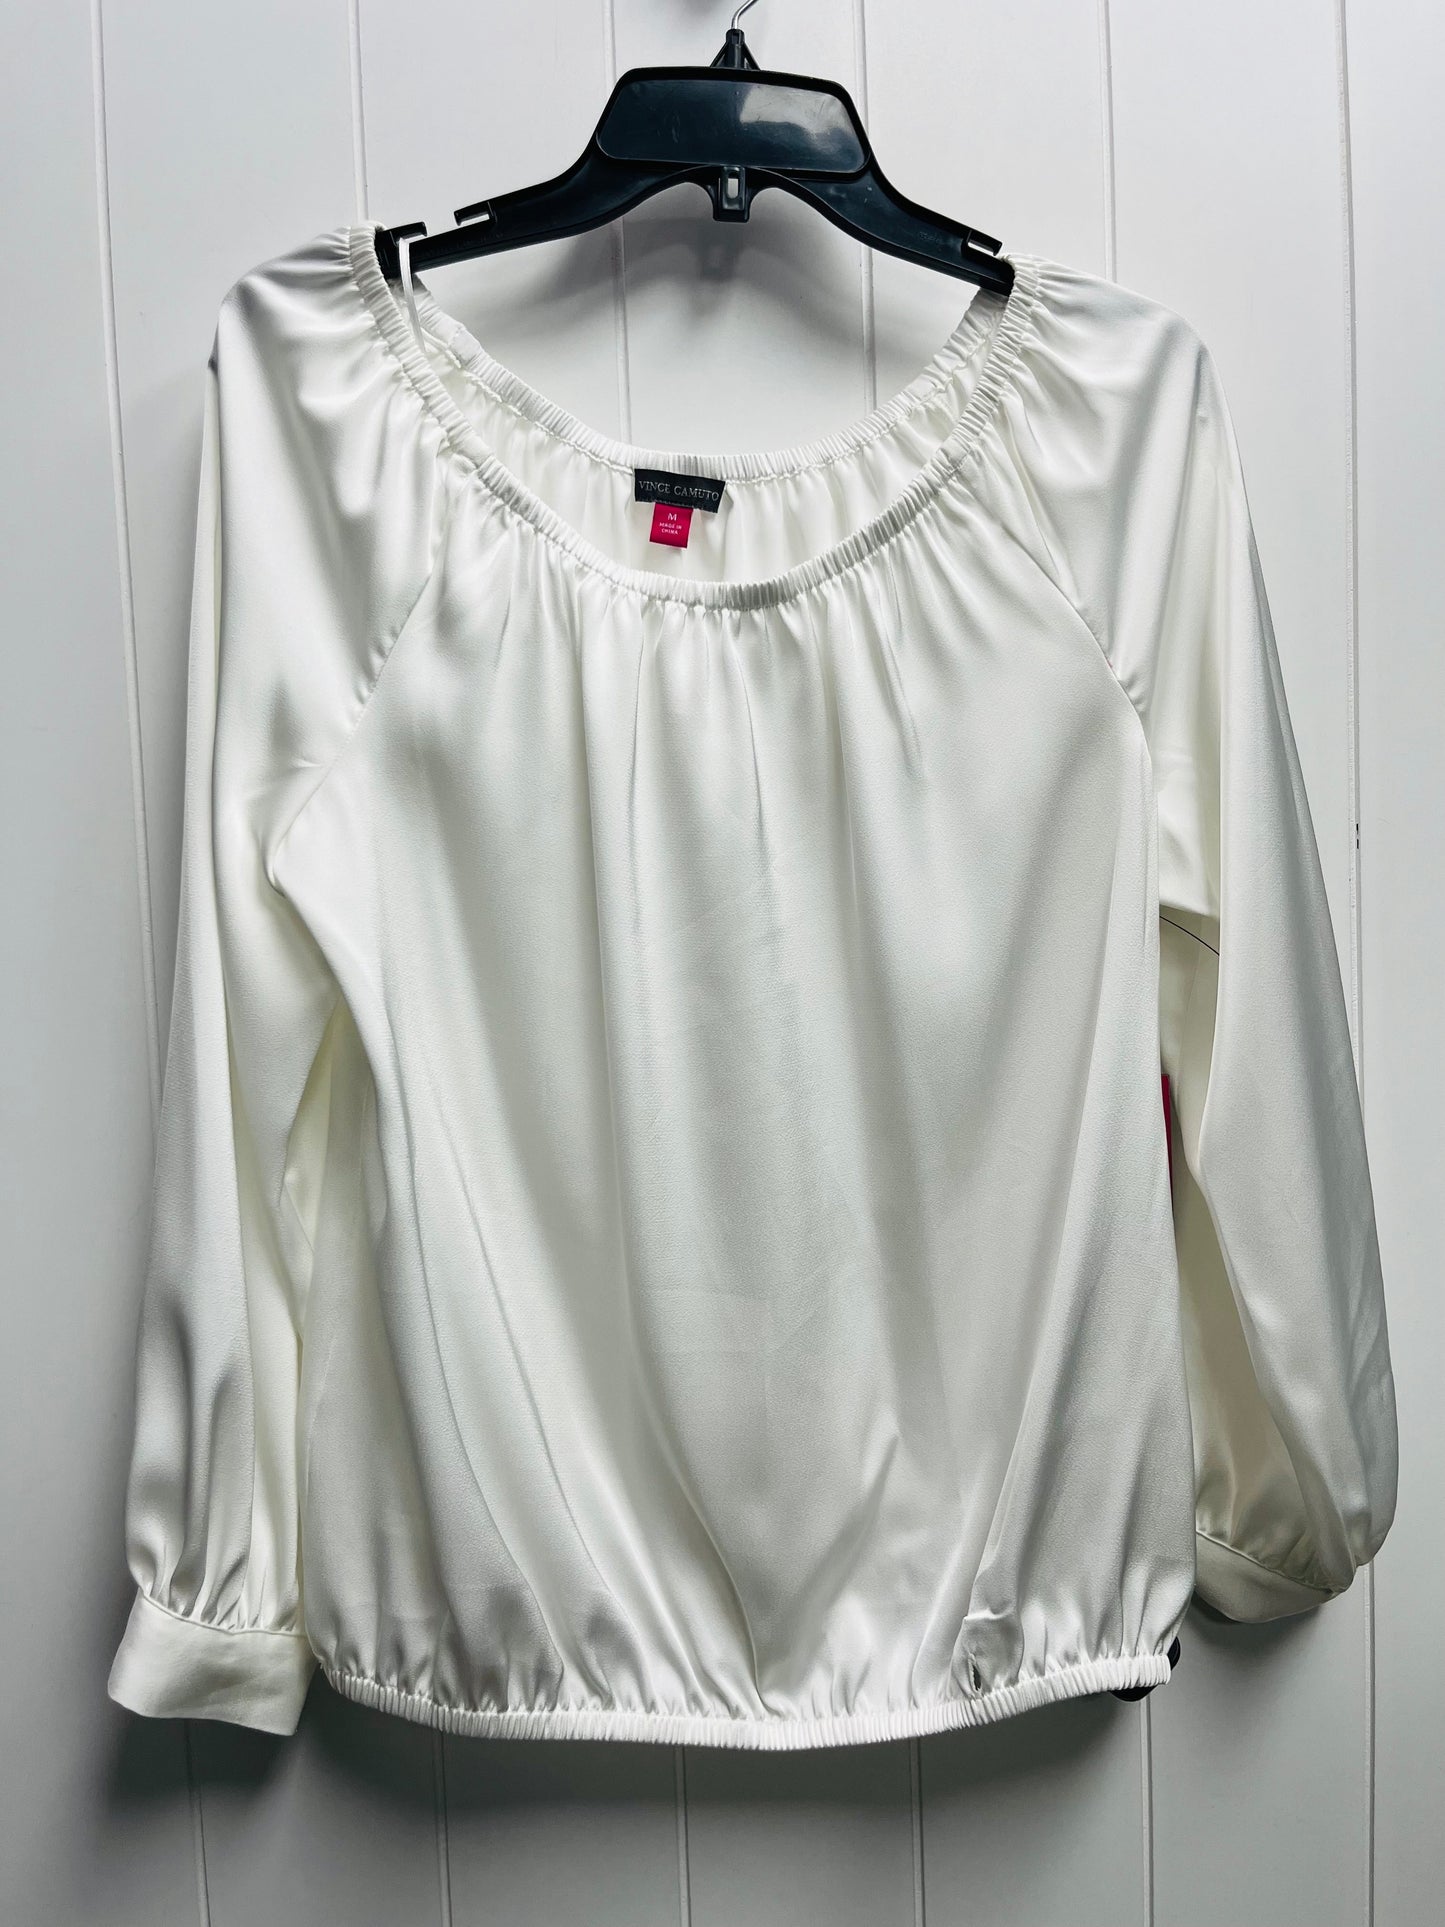 White Blouse Long Sleeve Vince Camuto, Size M